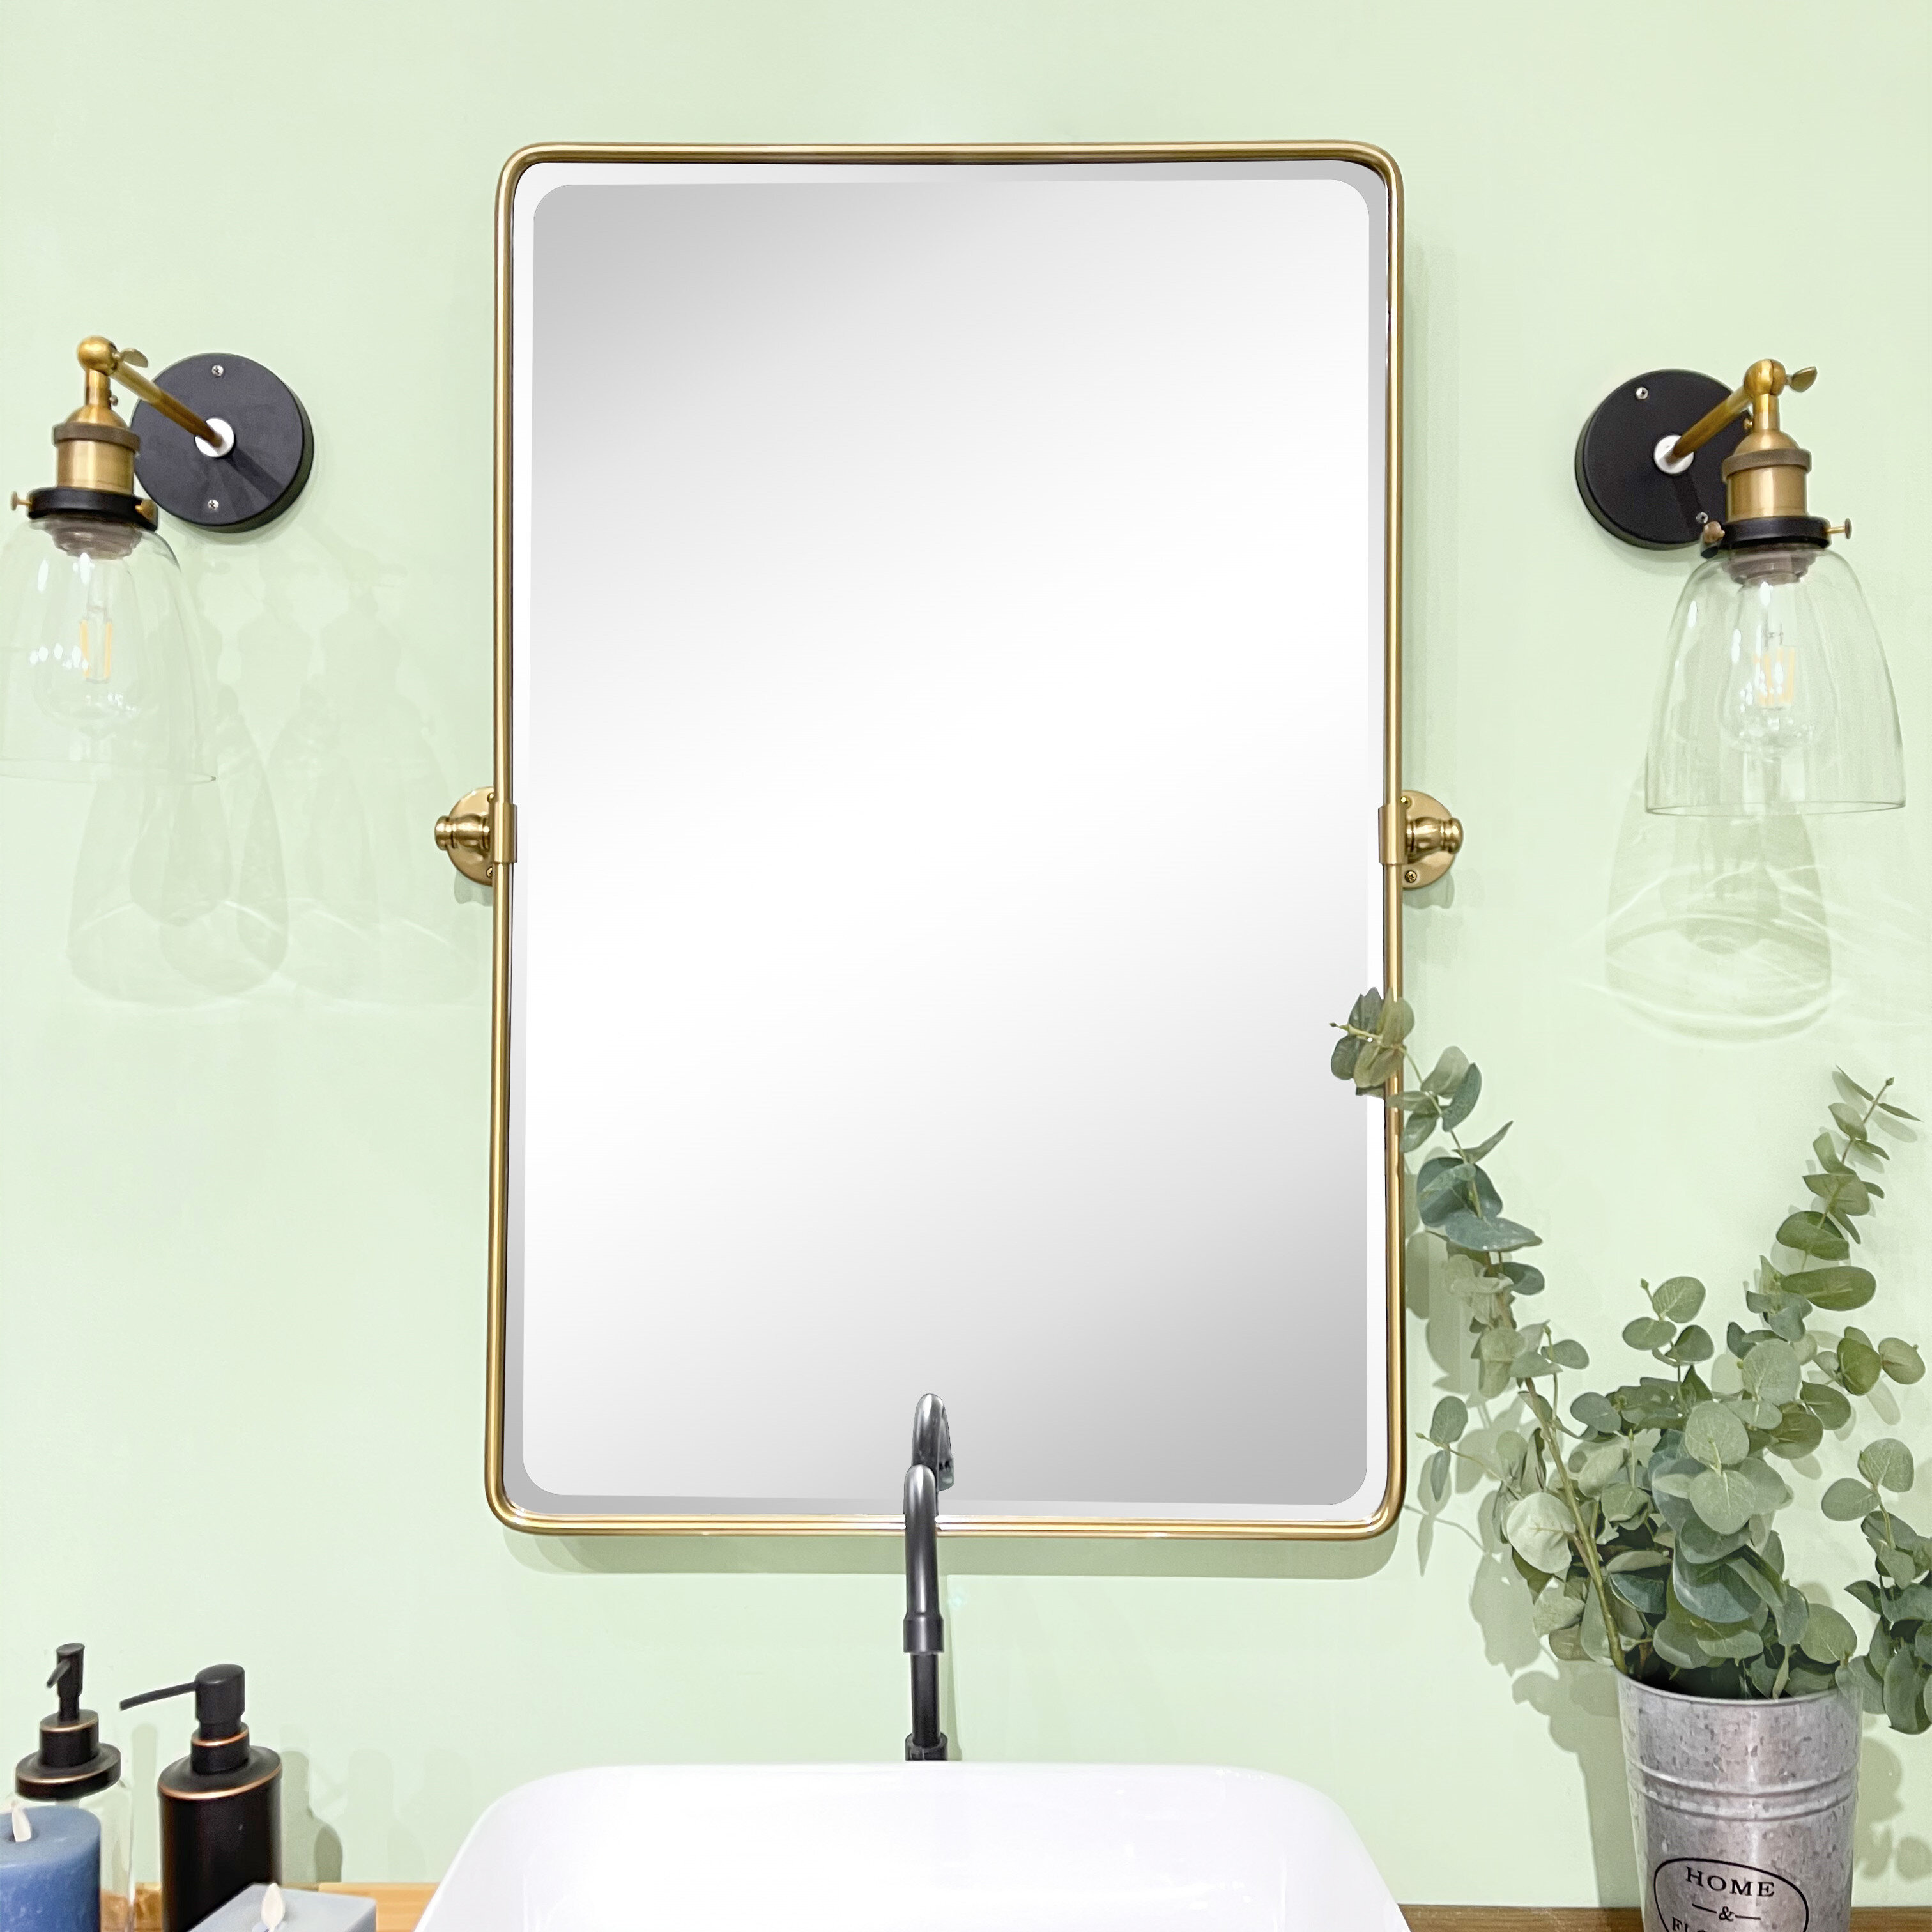 Bathroom Accessories Mirror Oval Mirror Full-Length Mirror Clothing Store Cloakroom Make-up Mirror Fitting Room Floor Mirror Fitting Mirror Wall-Mounted Mirror High 120cm